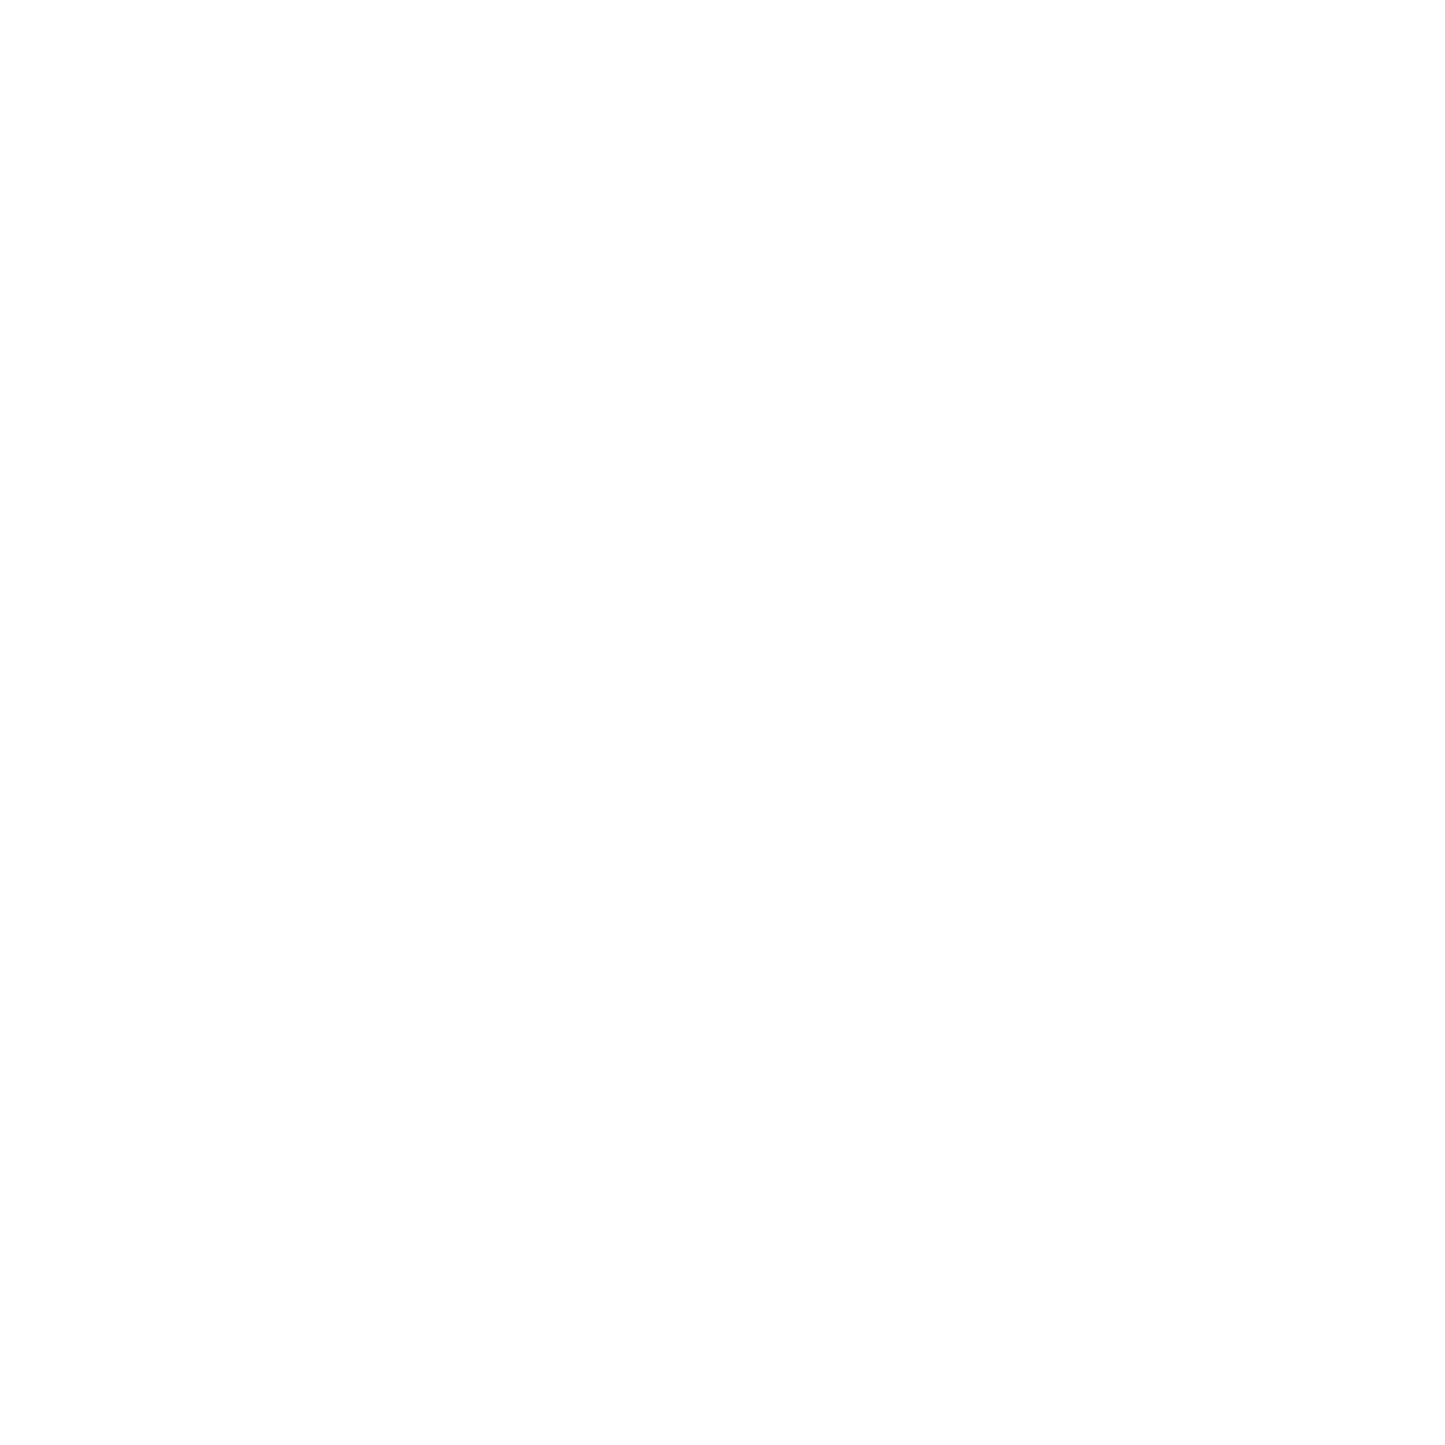 Im into Fitness, Fitness Beer in my Mouth